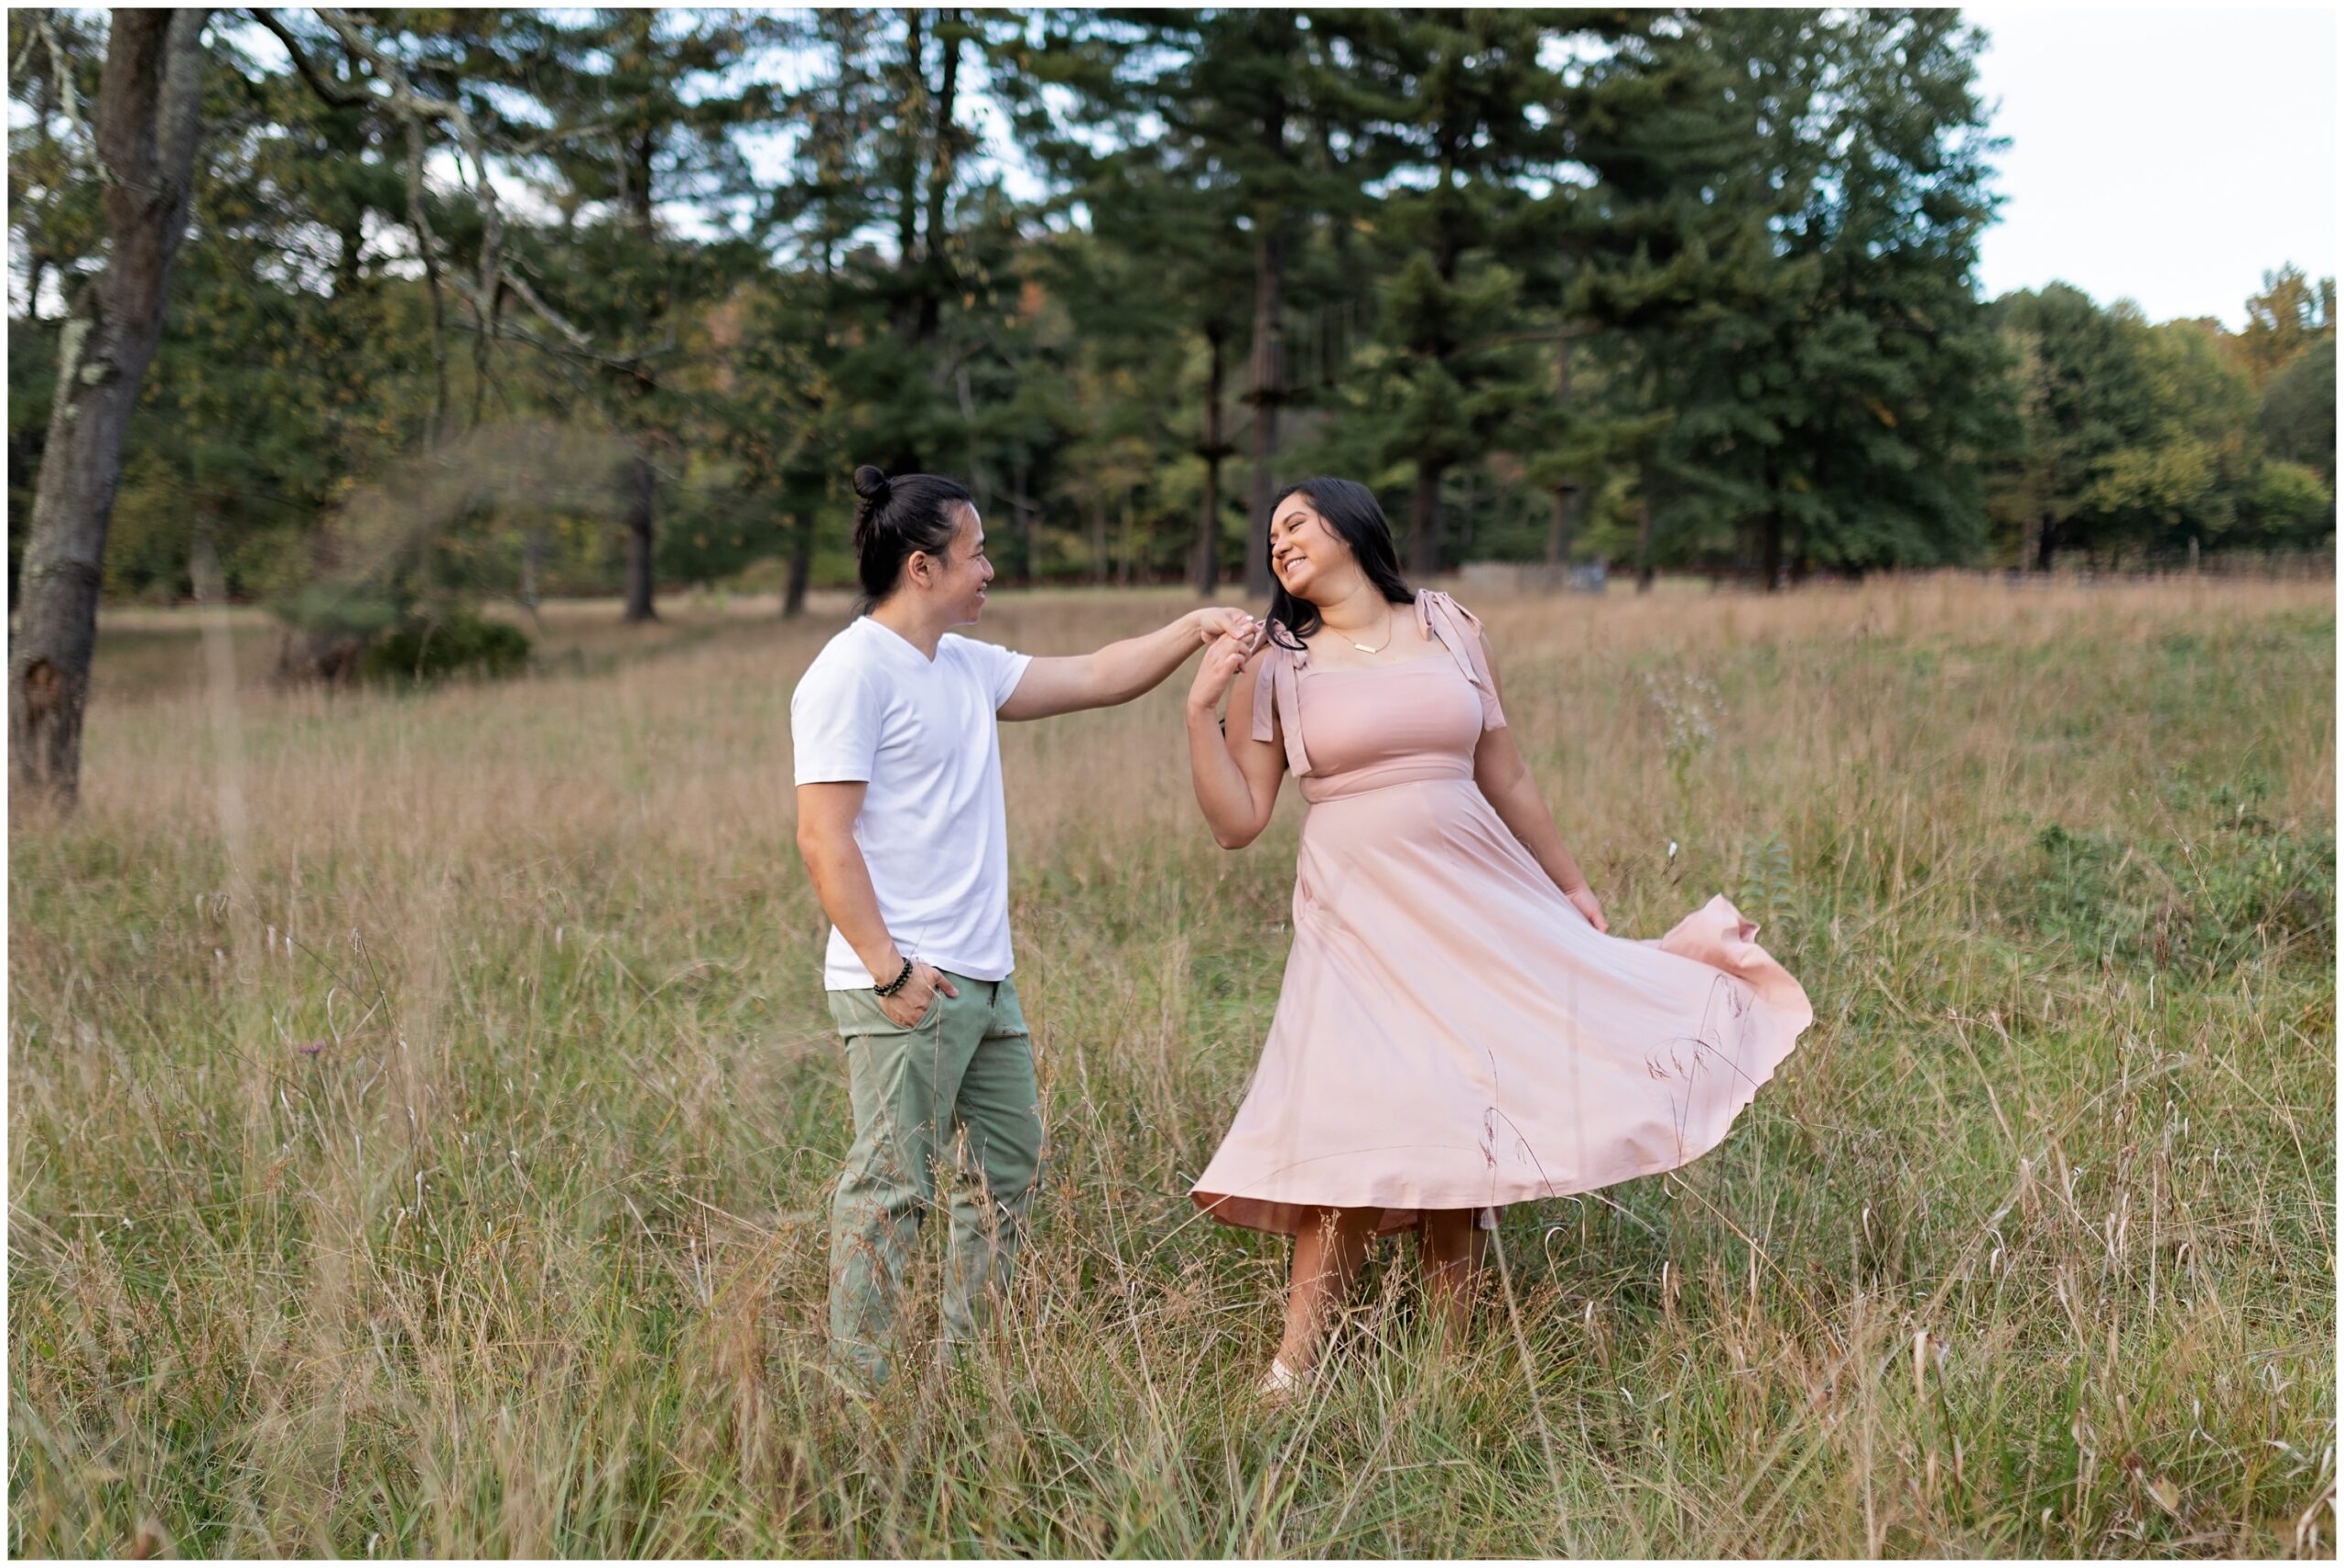 Fall North Park Engagement Session in Pittsburgh, PA Photographed by Pittsburgh Wedding & Engagement Photographer Acevedo Weddings